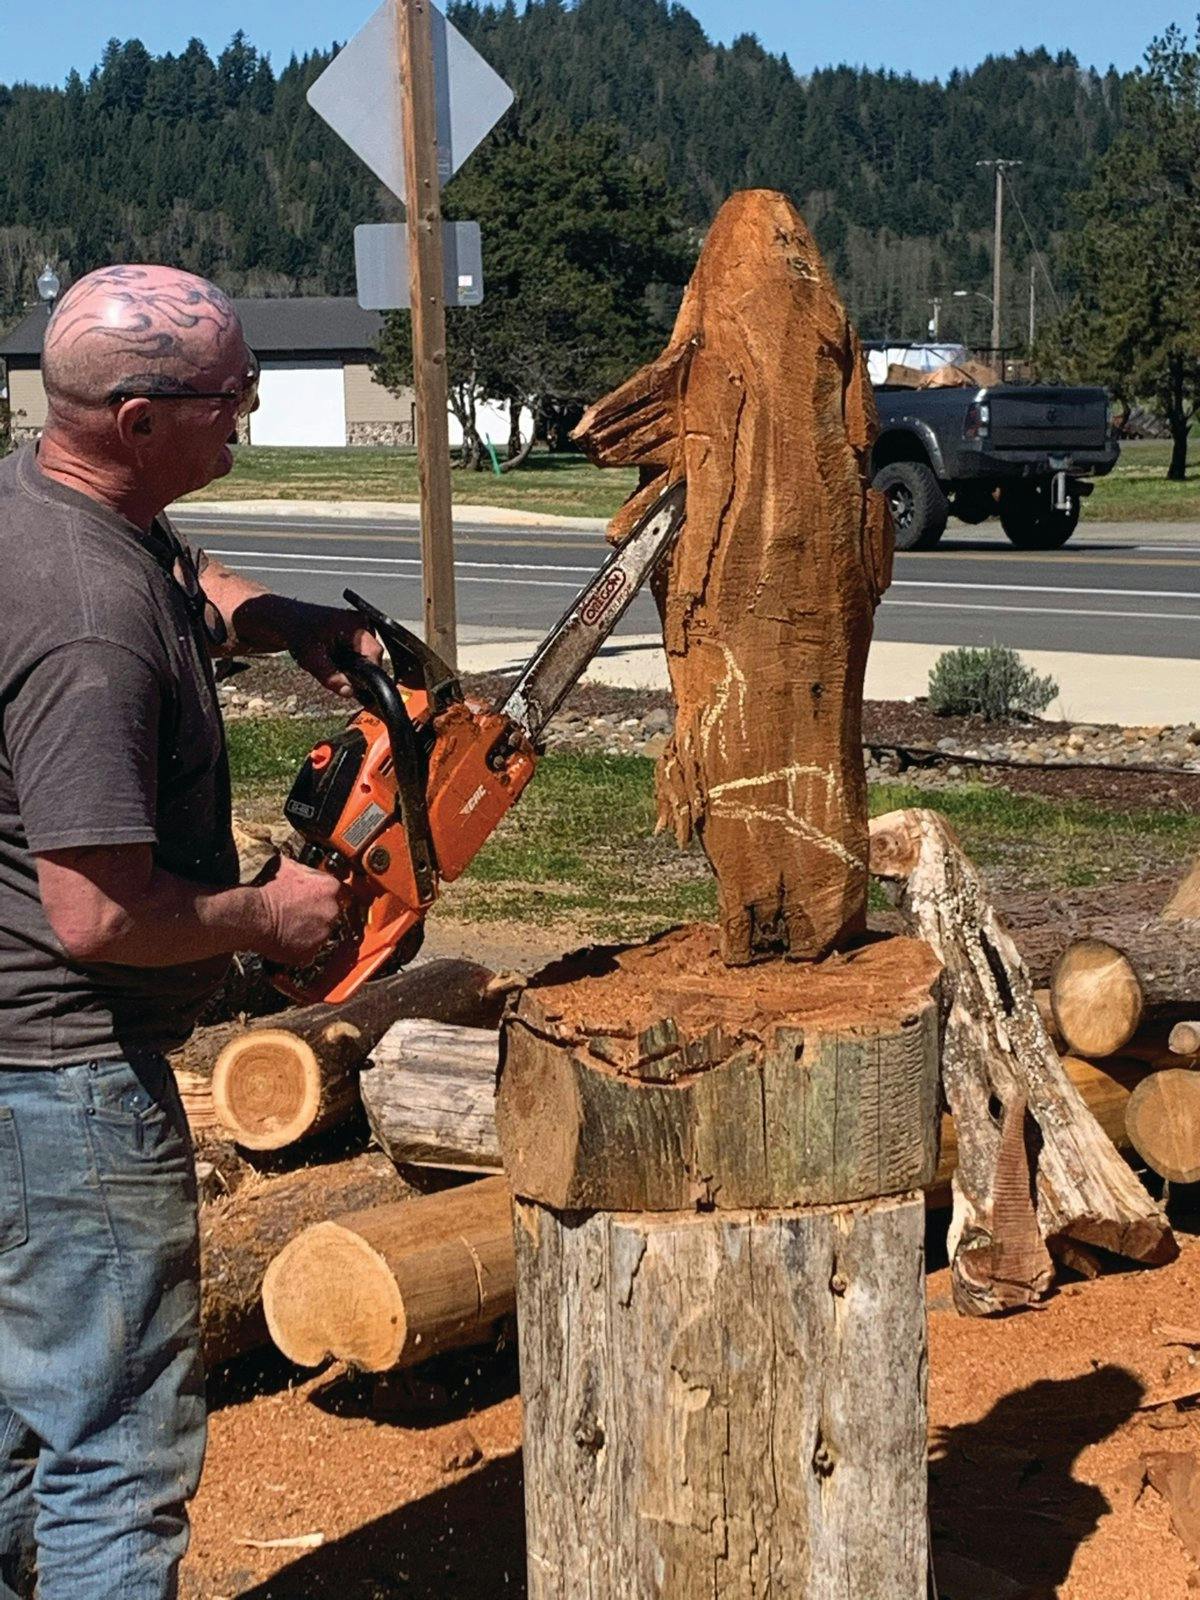 Attend the Chainsaw Carving Championship